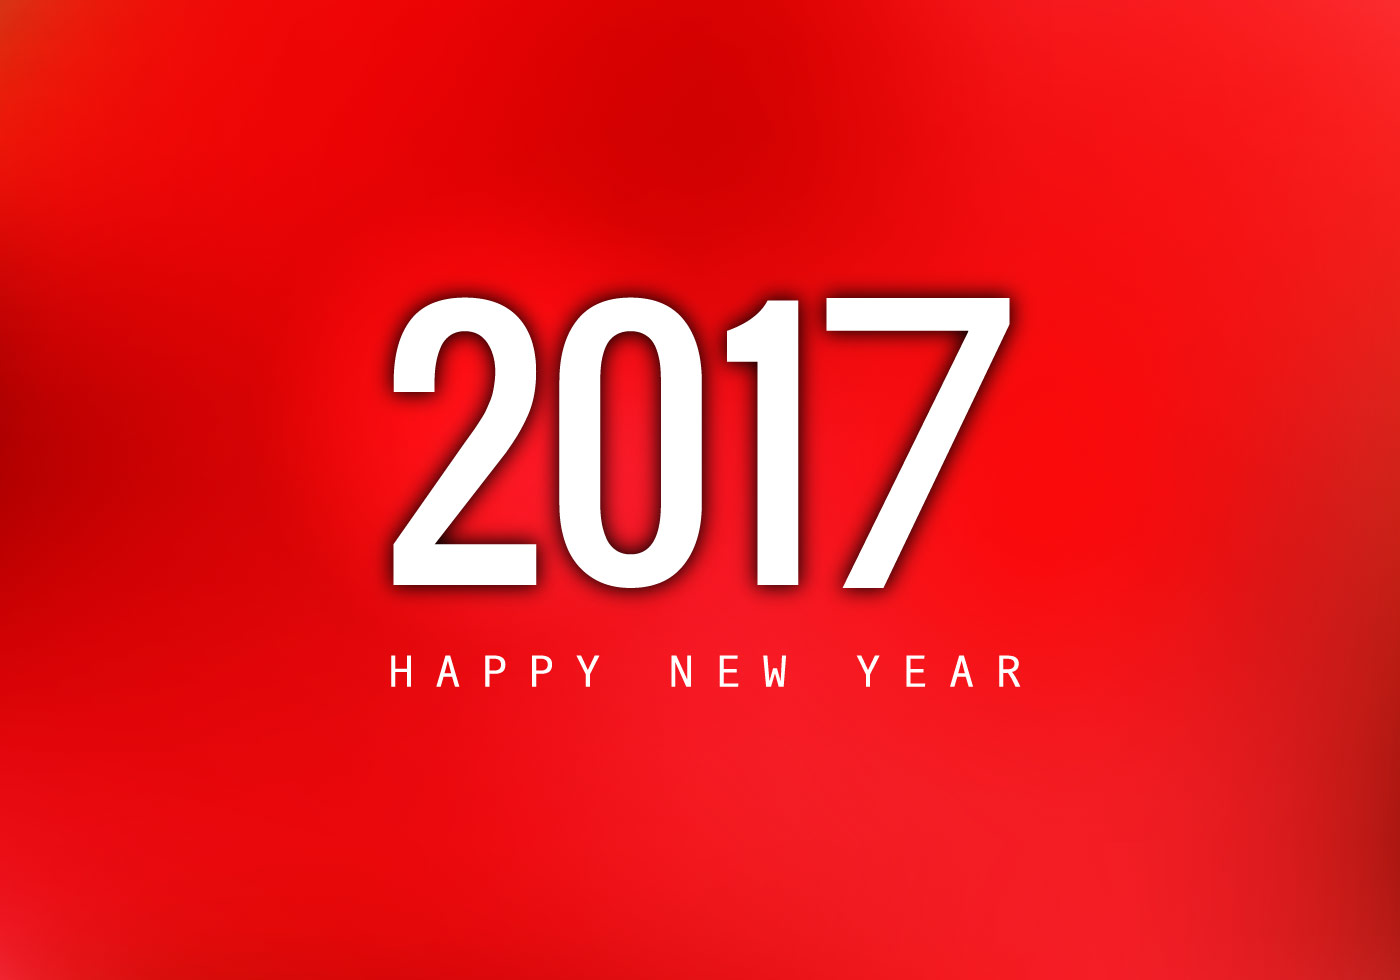 happy new year 2017 wallpaper,red,text,font,logo,brand